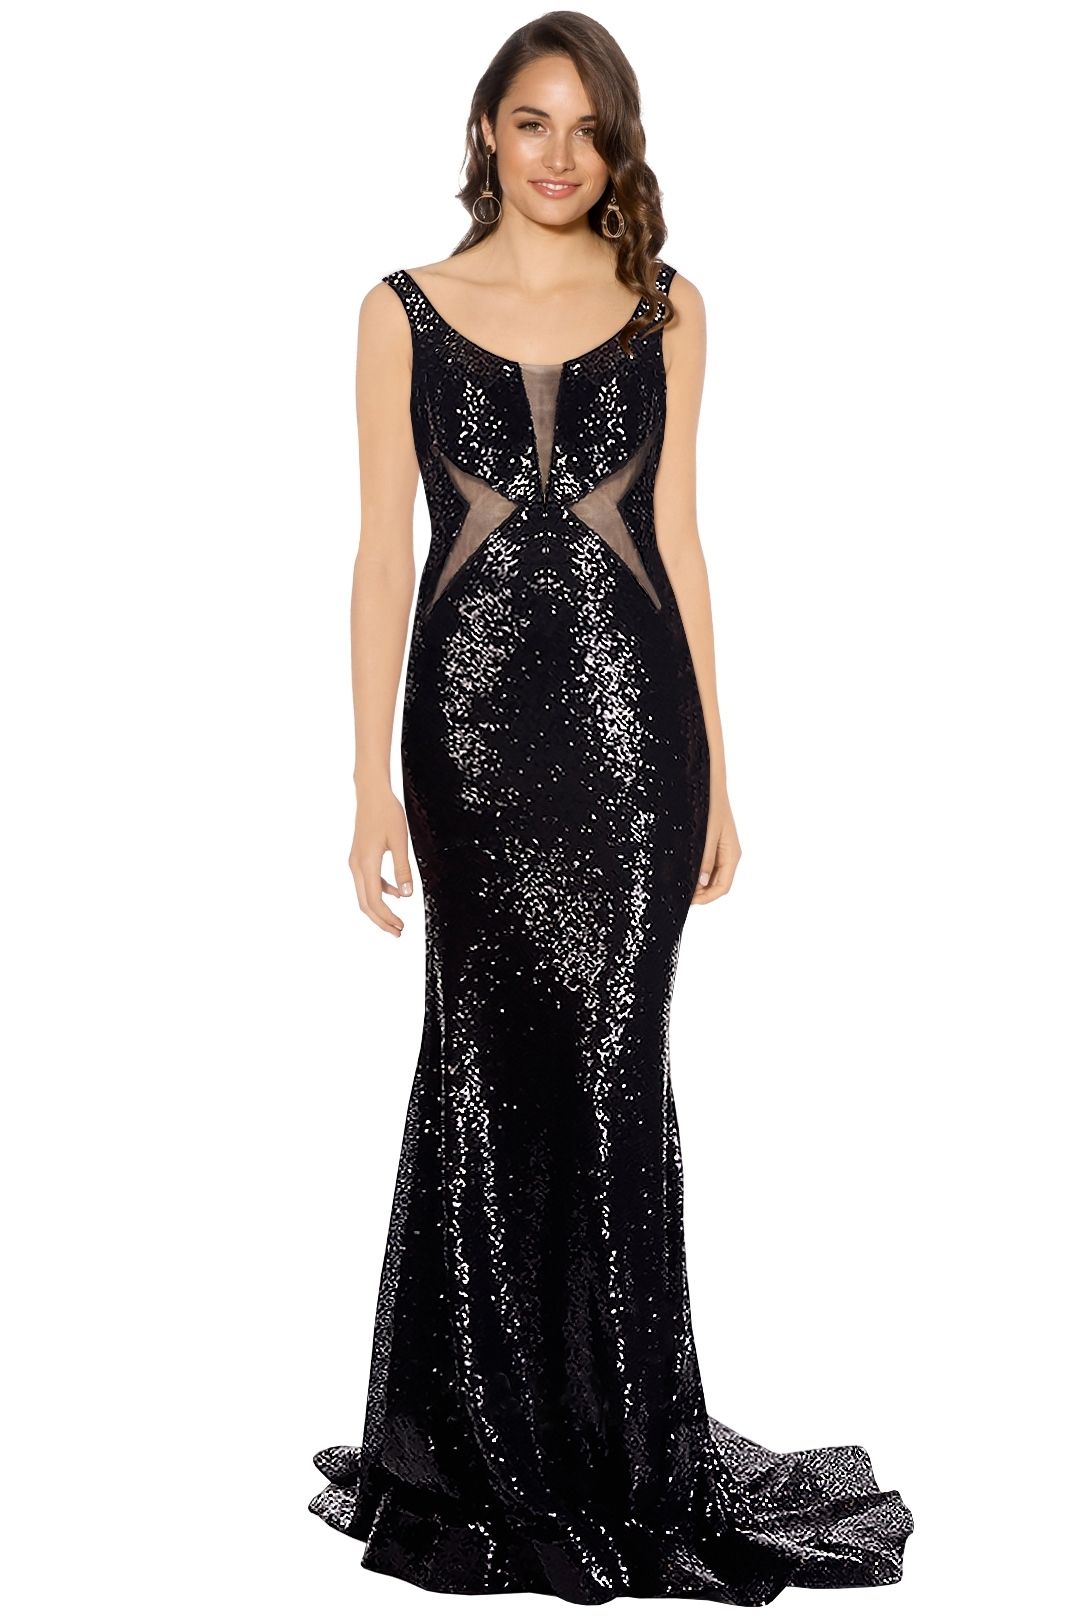 Tinaholy - Midnight Sequin Gown - Black - Front